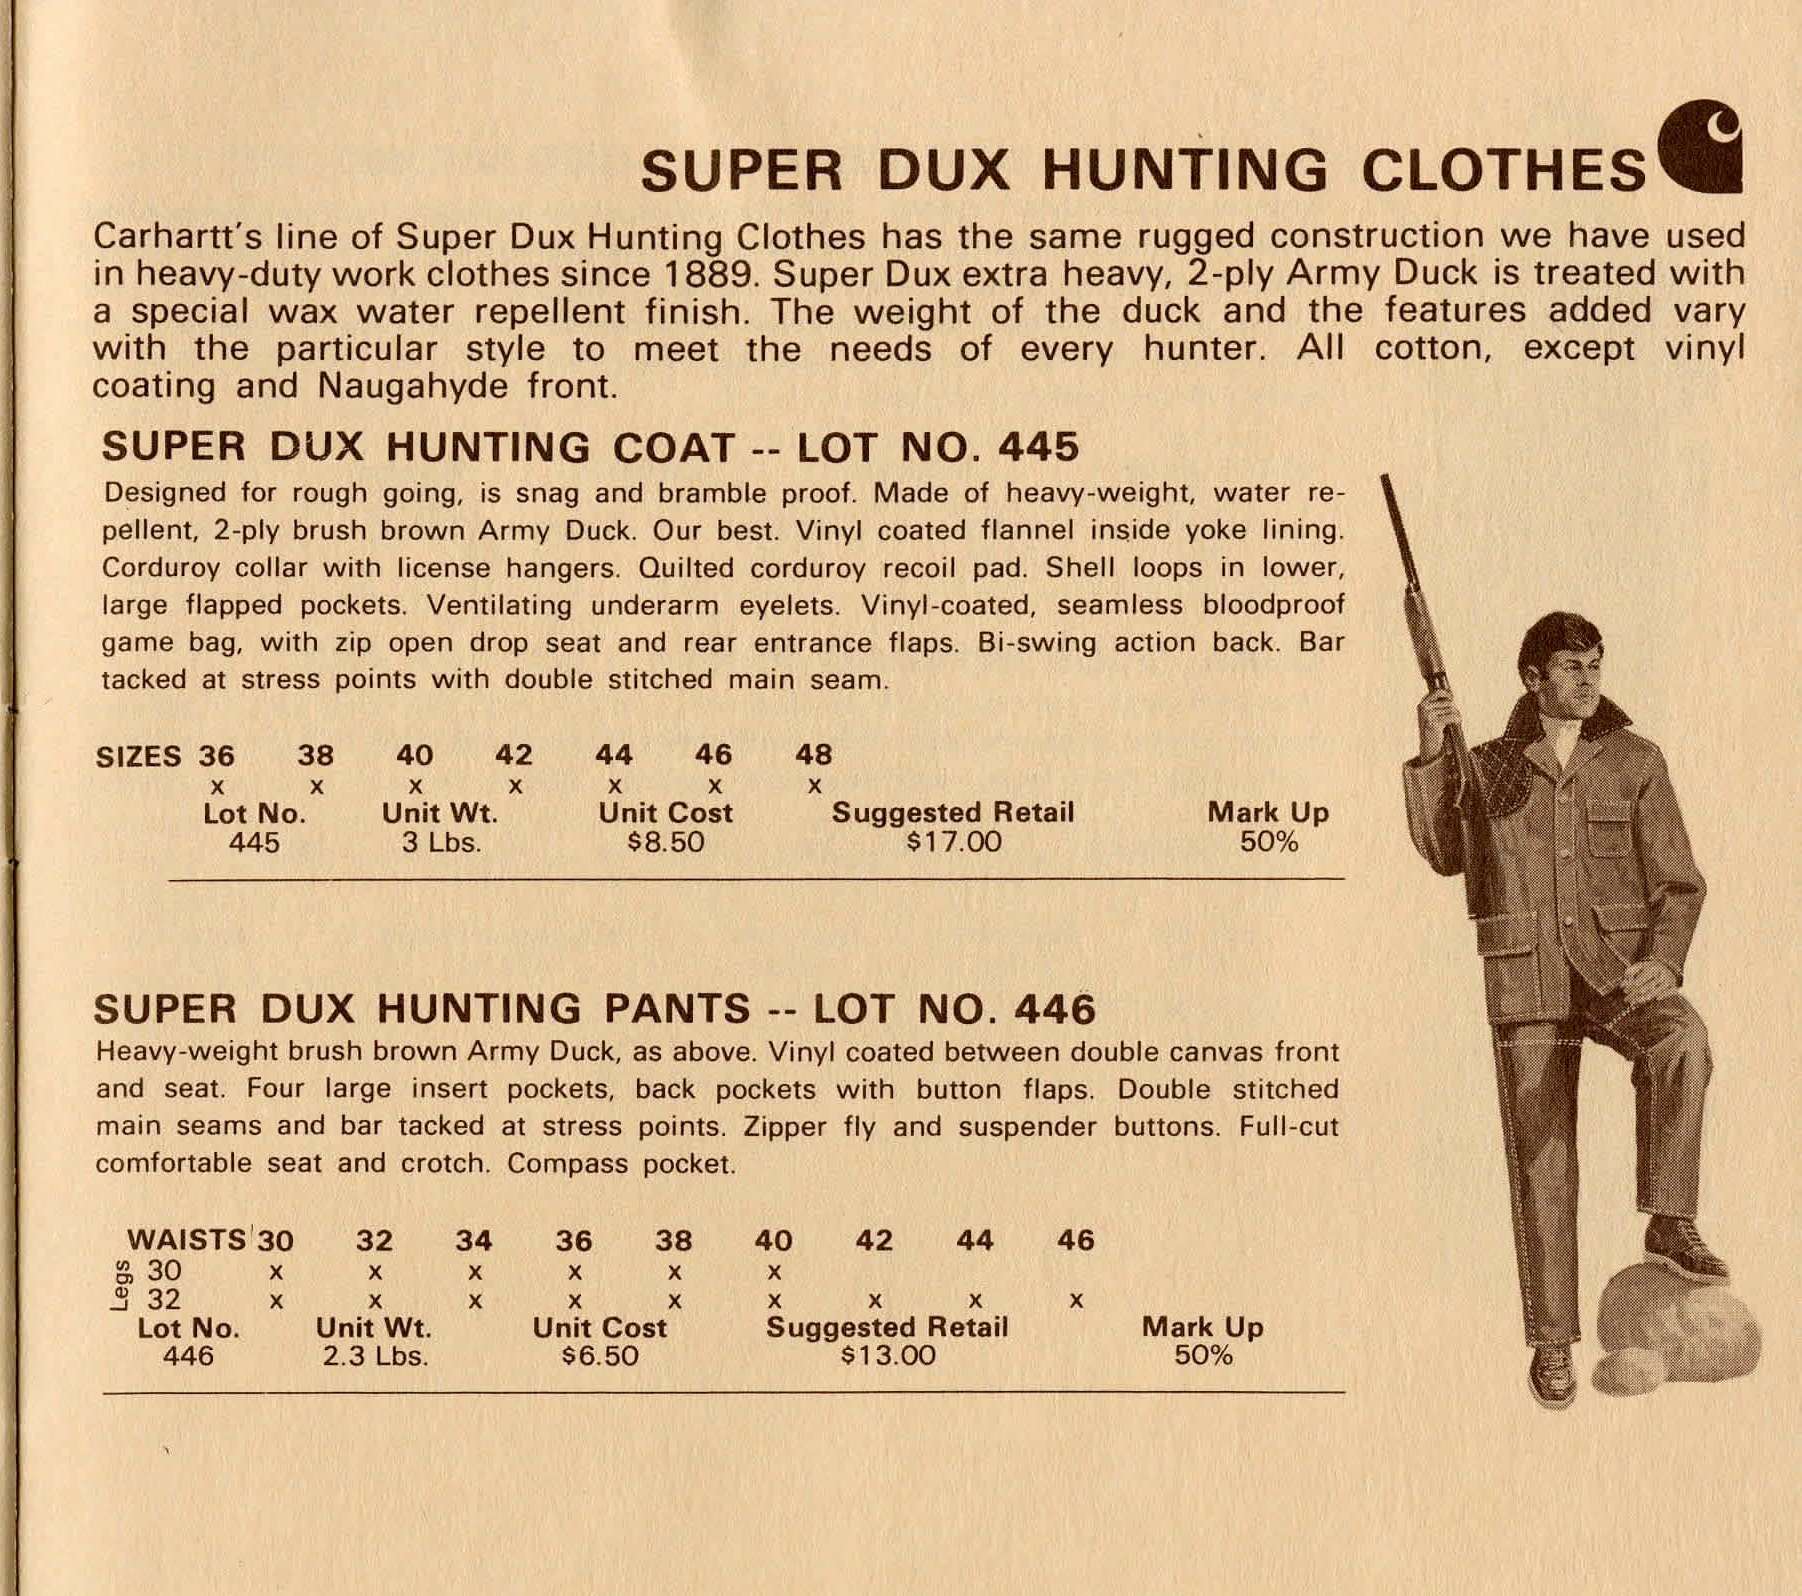 <b>1971-1973:</b> After another pause, Carhartt Super Dux returns. This time, the line includes heavy-weight garments (coat, pants, and brush pants with a naugahyde front), medium-weight garments (coat and pants), and two different vest options (both with attached game bags).
